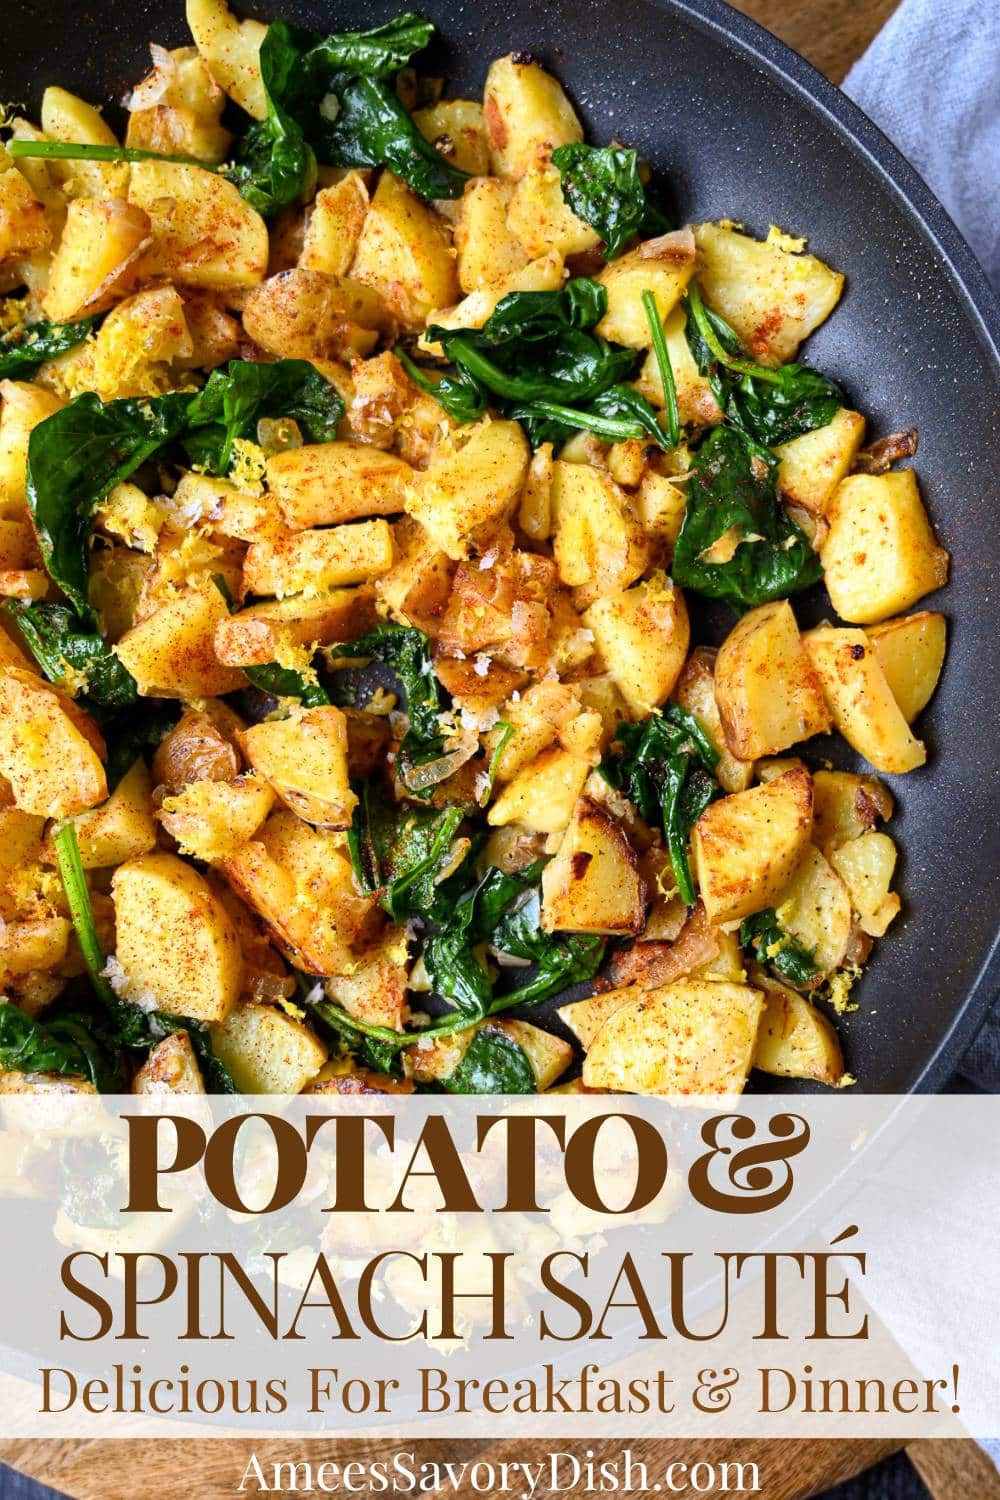 An easy breakfast recipe for a potato and spinach sauté made with Yukon gold potatoes, onions, and fresh spinach. These delicious skillet potatoes with spinach are perfect any time of day! via @Ameessavorydish